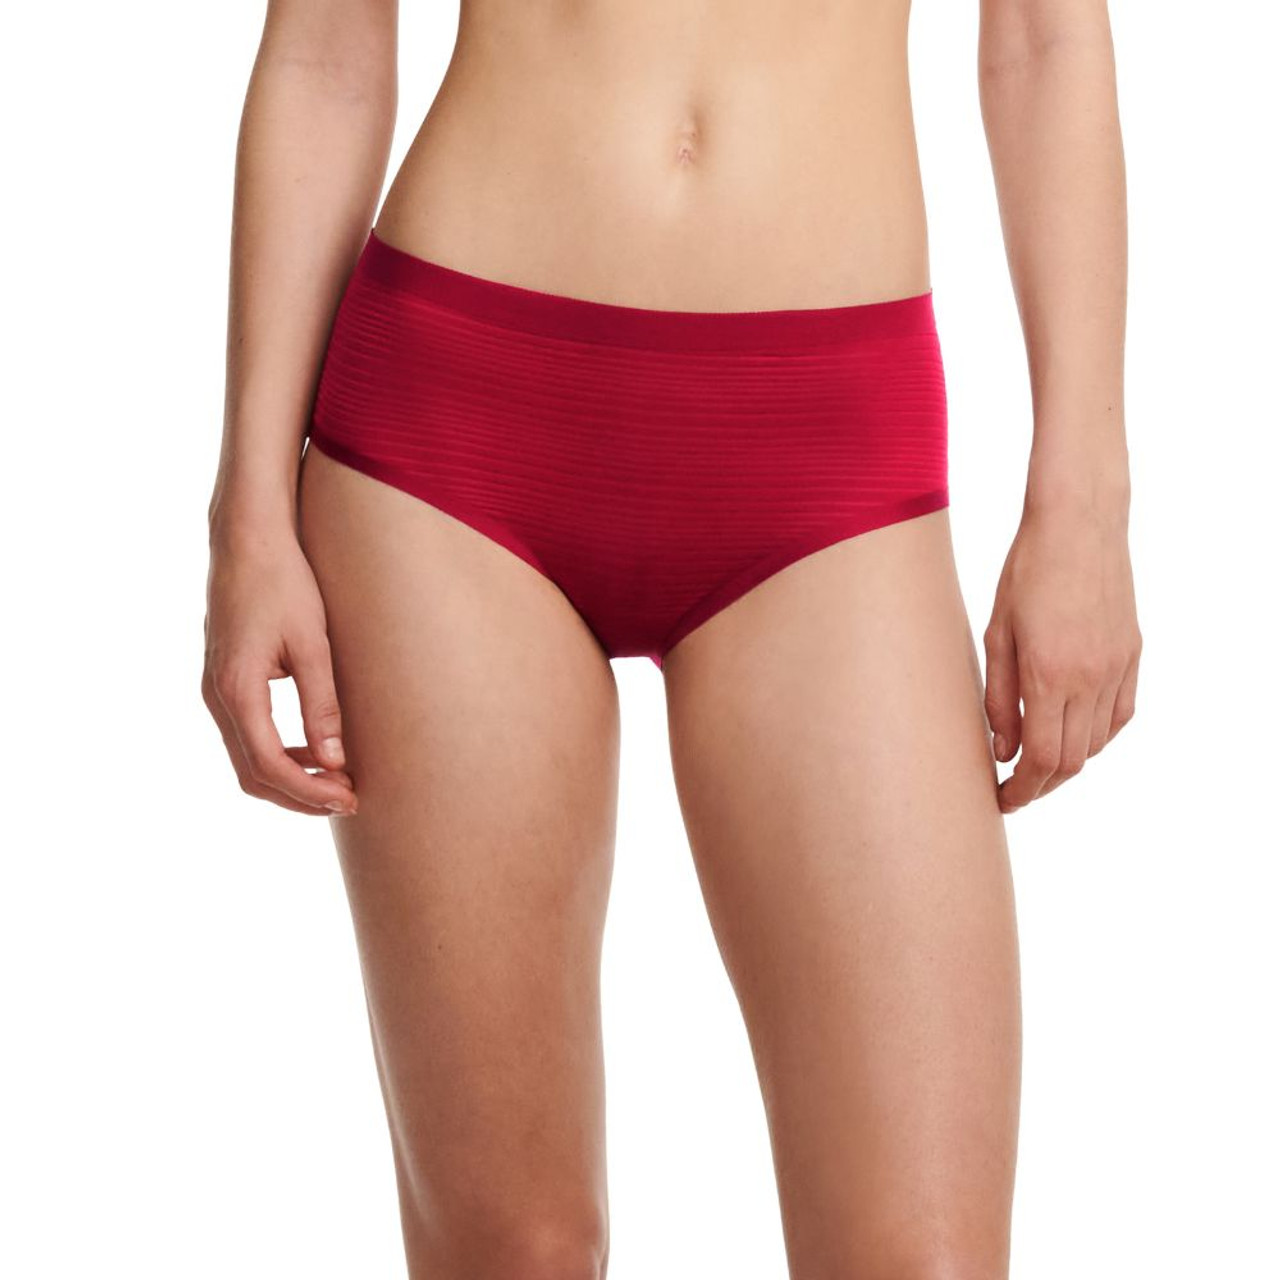 Chantelle SoftStretch Knickers Hipster - The Short Way